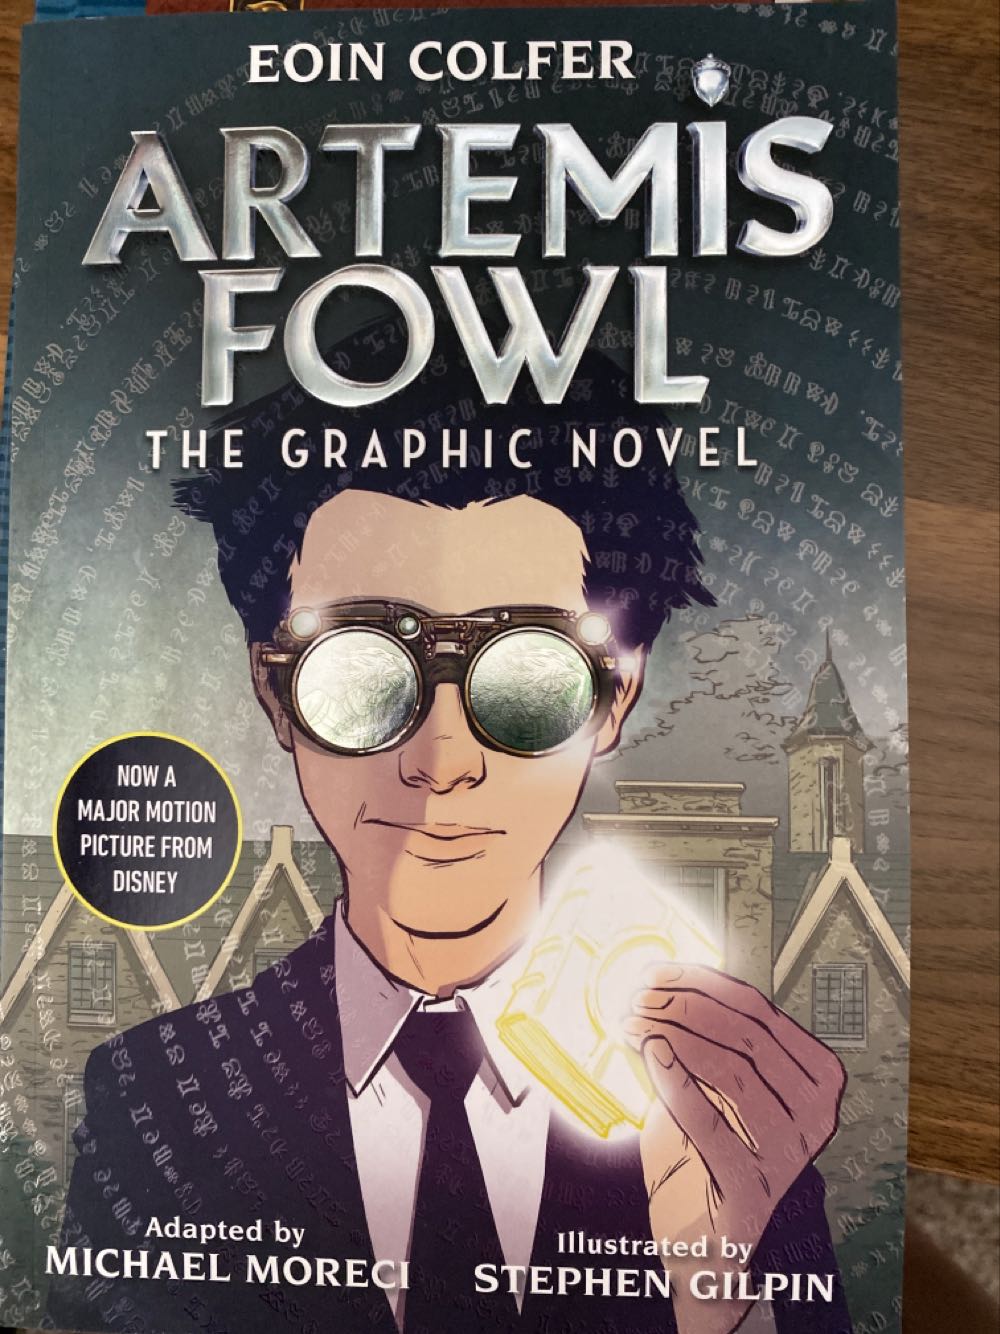 Artemis Fowl: The Graphic Novel - Eoin Colfer (Disney - Paperback) book collectible [Barcode 9781368043700] - Main Image 1